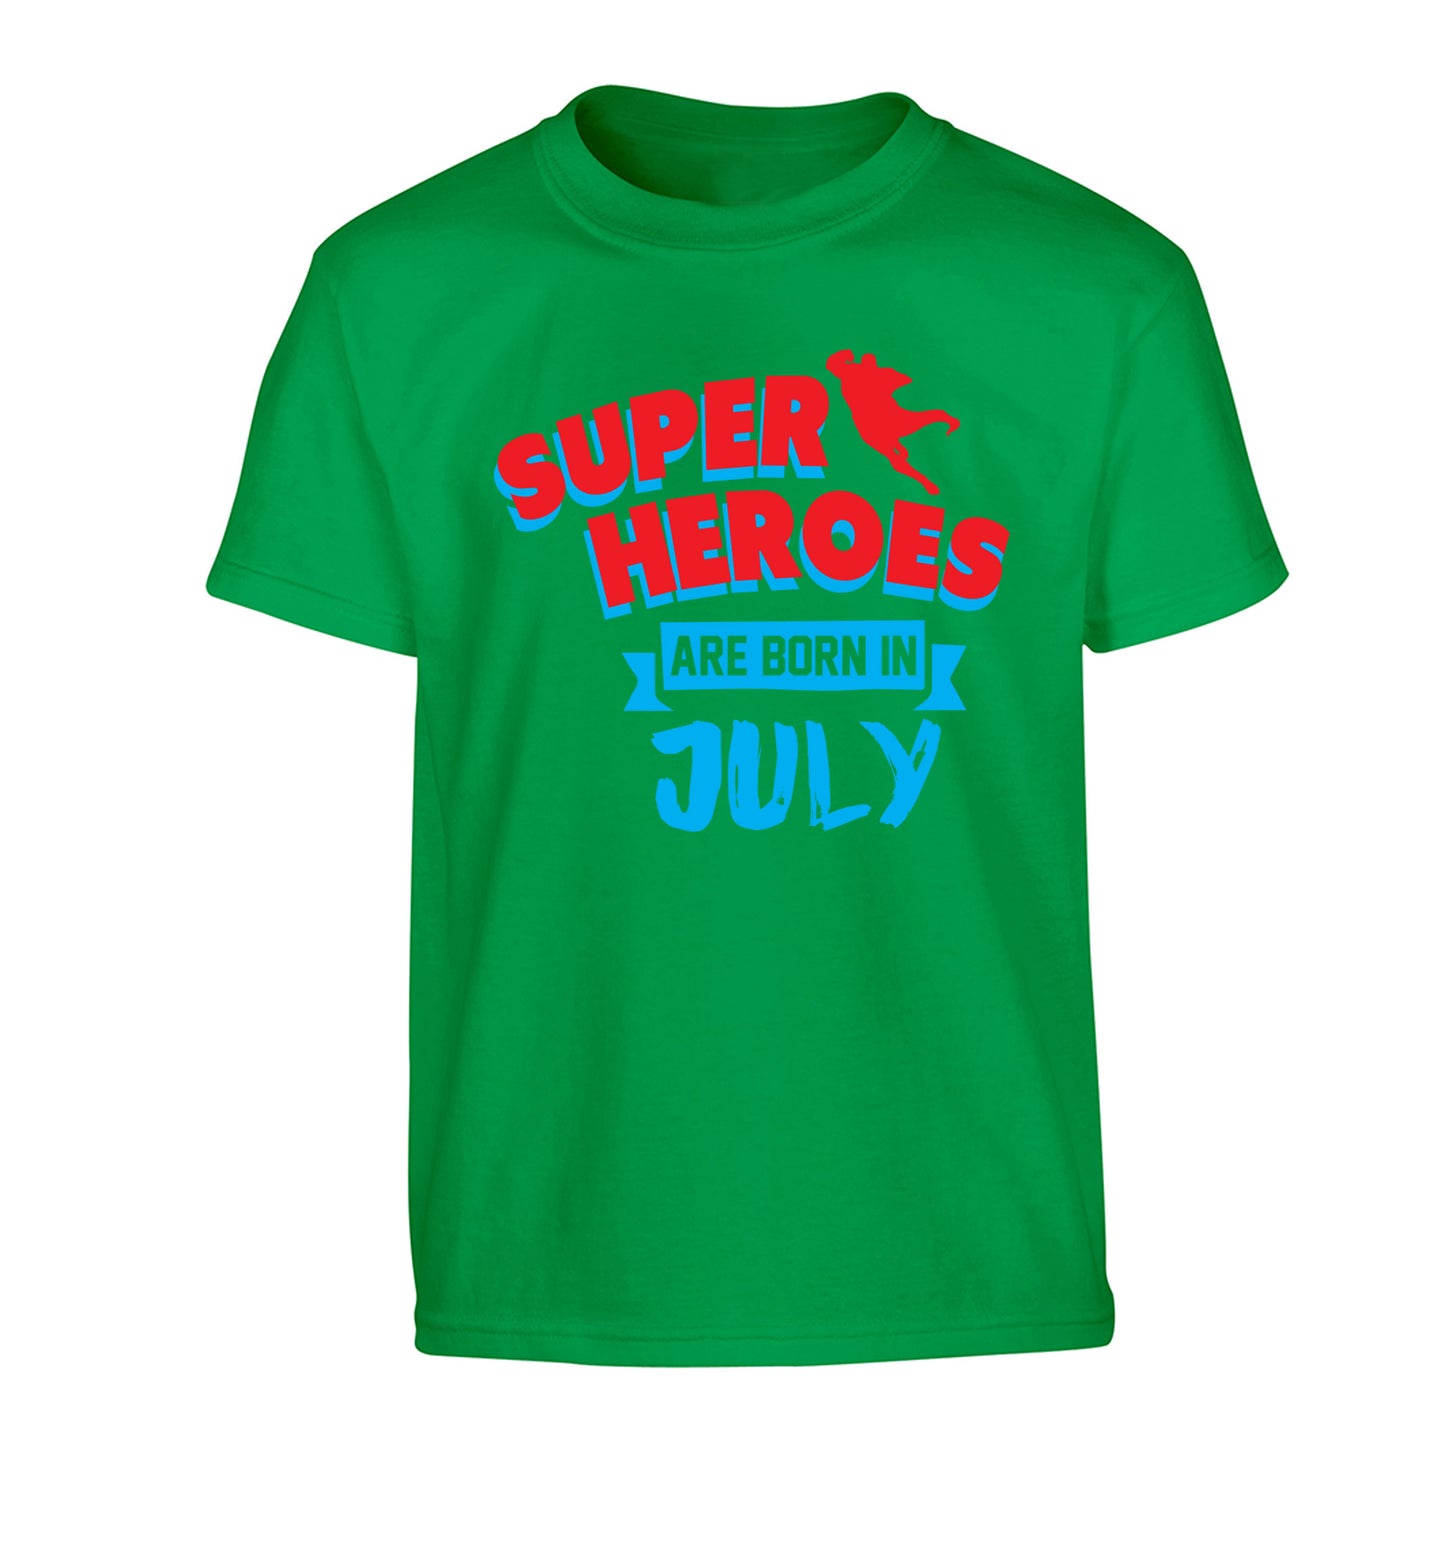 Superheroes are born in July Children's green Tshirt 12-13 Years